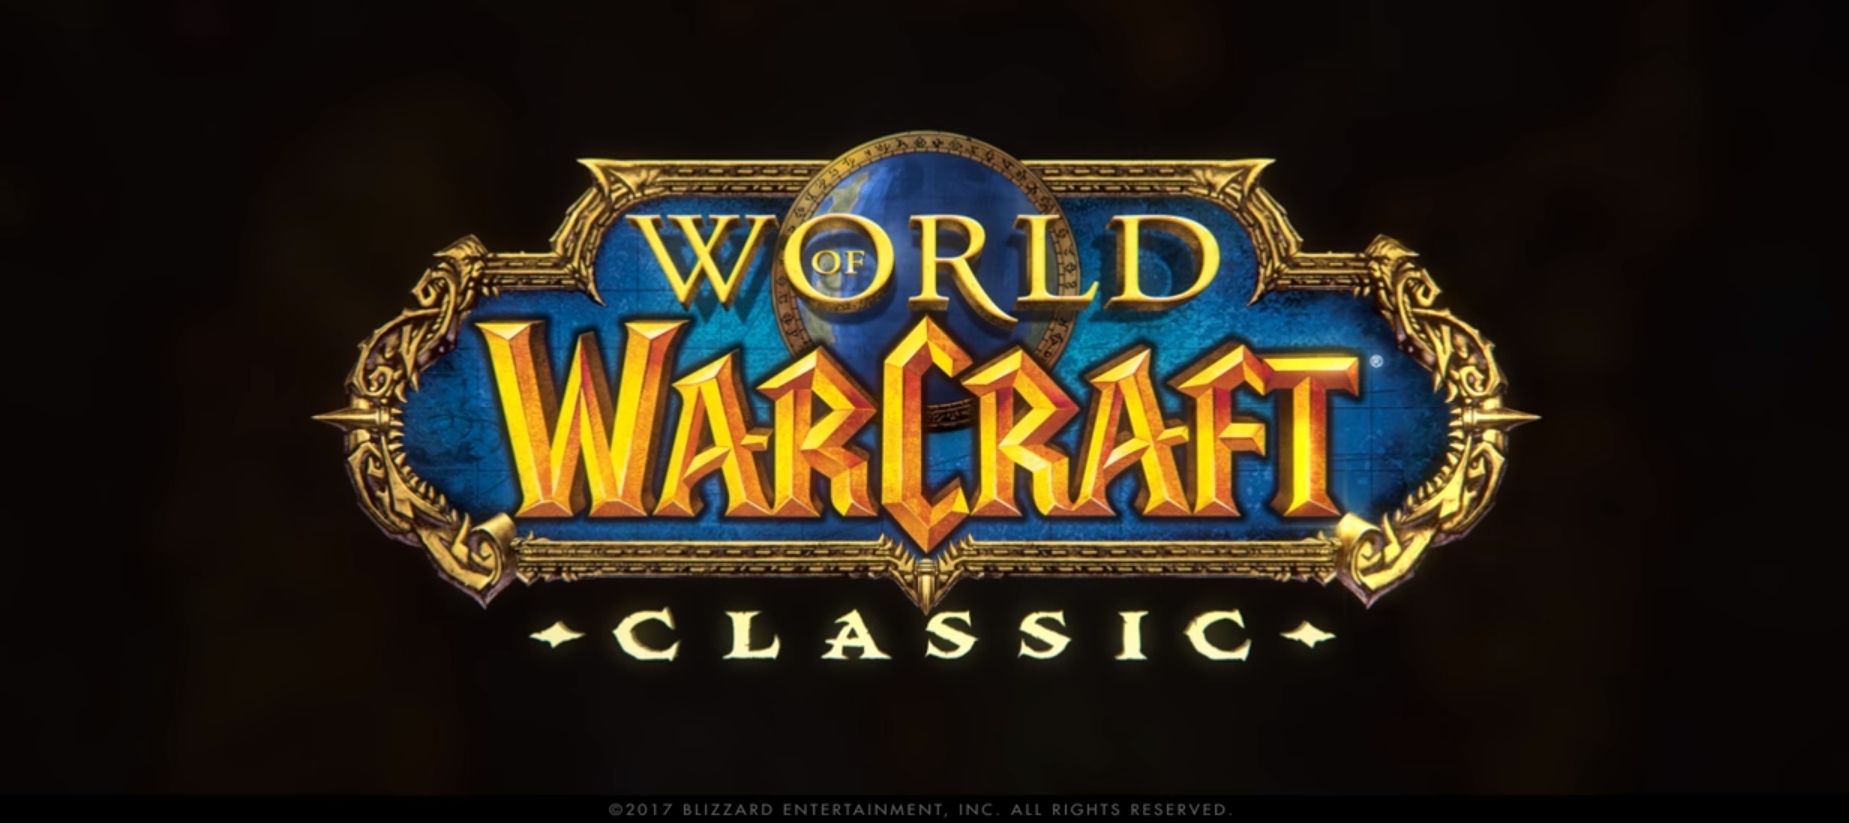 Arathi Basin, Zul’Gurub, And Green Dragons Are All Coming To World Of Warcraft: Classic!